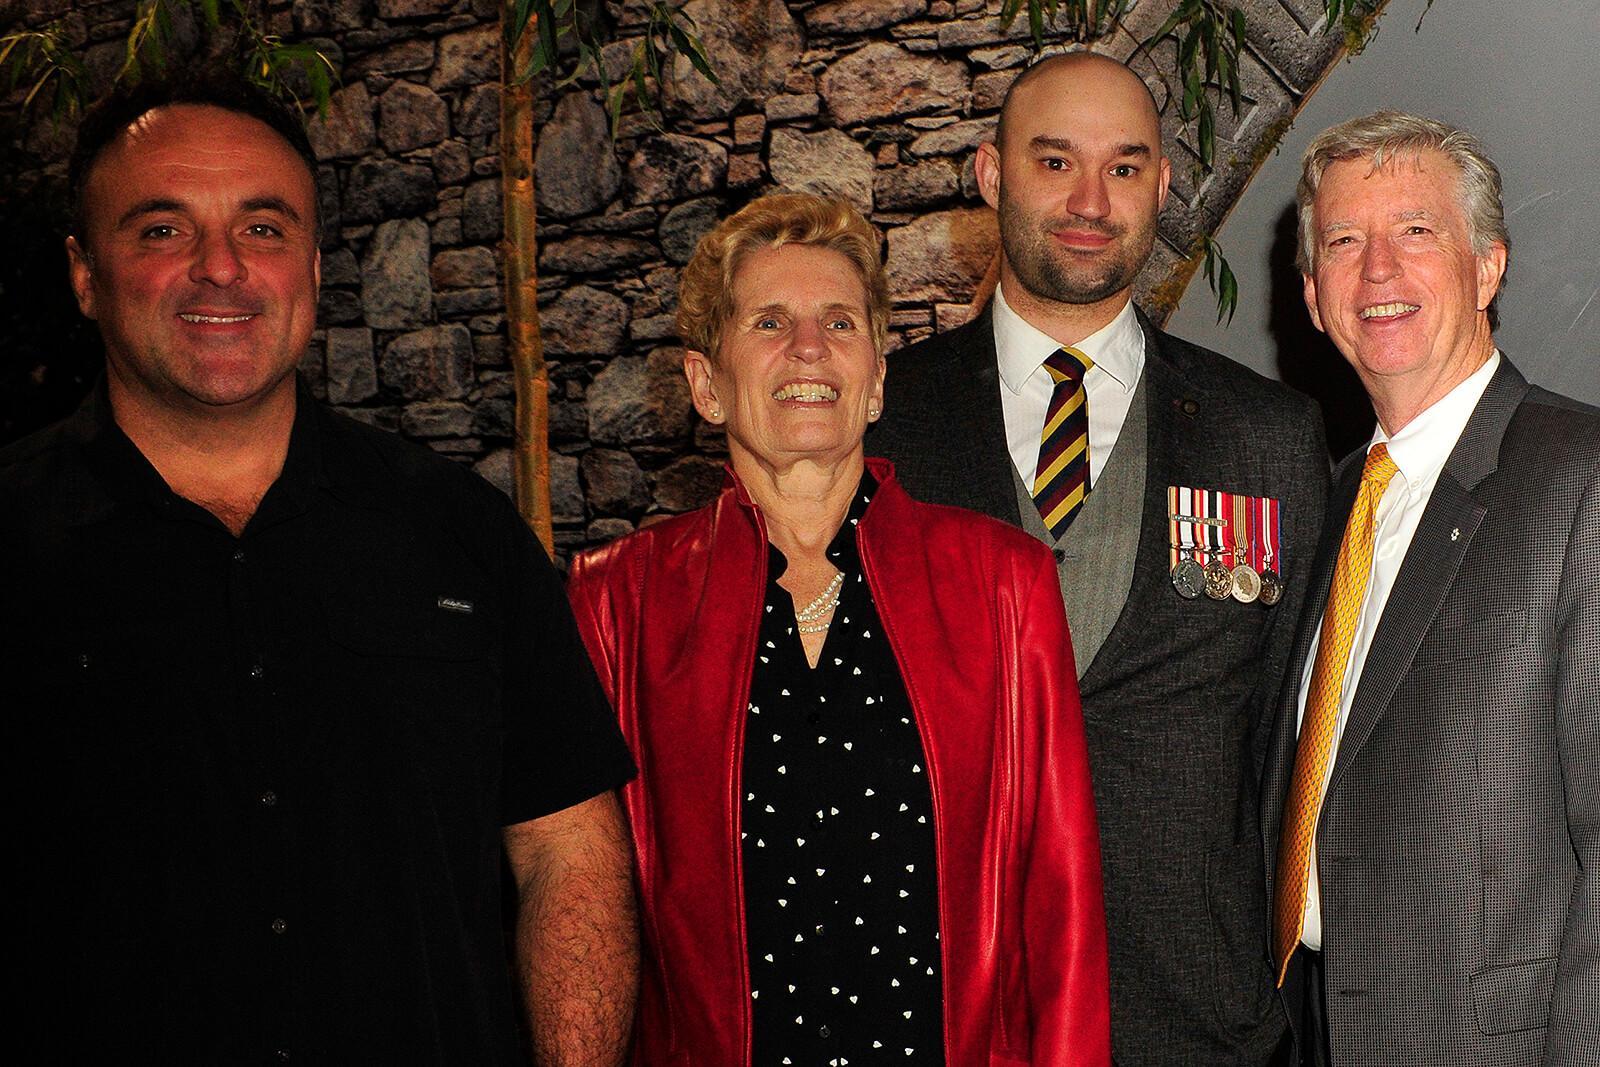 Canada Blooms began with an event in the Highway of Heroes Living Tribute garden where Ontario Premier, Kathleen Wynne (centre) announced the province will contribute $1 million to the HOHLT campaign. Wynne is pictured with garden builder, Joe Genovese (left), volunteer fundraiser, Cpl. Nick Kerr, and founder, Mark Cullen.